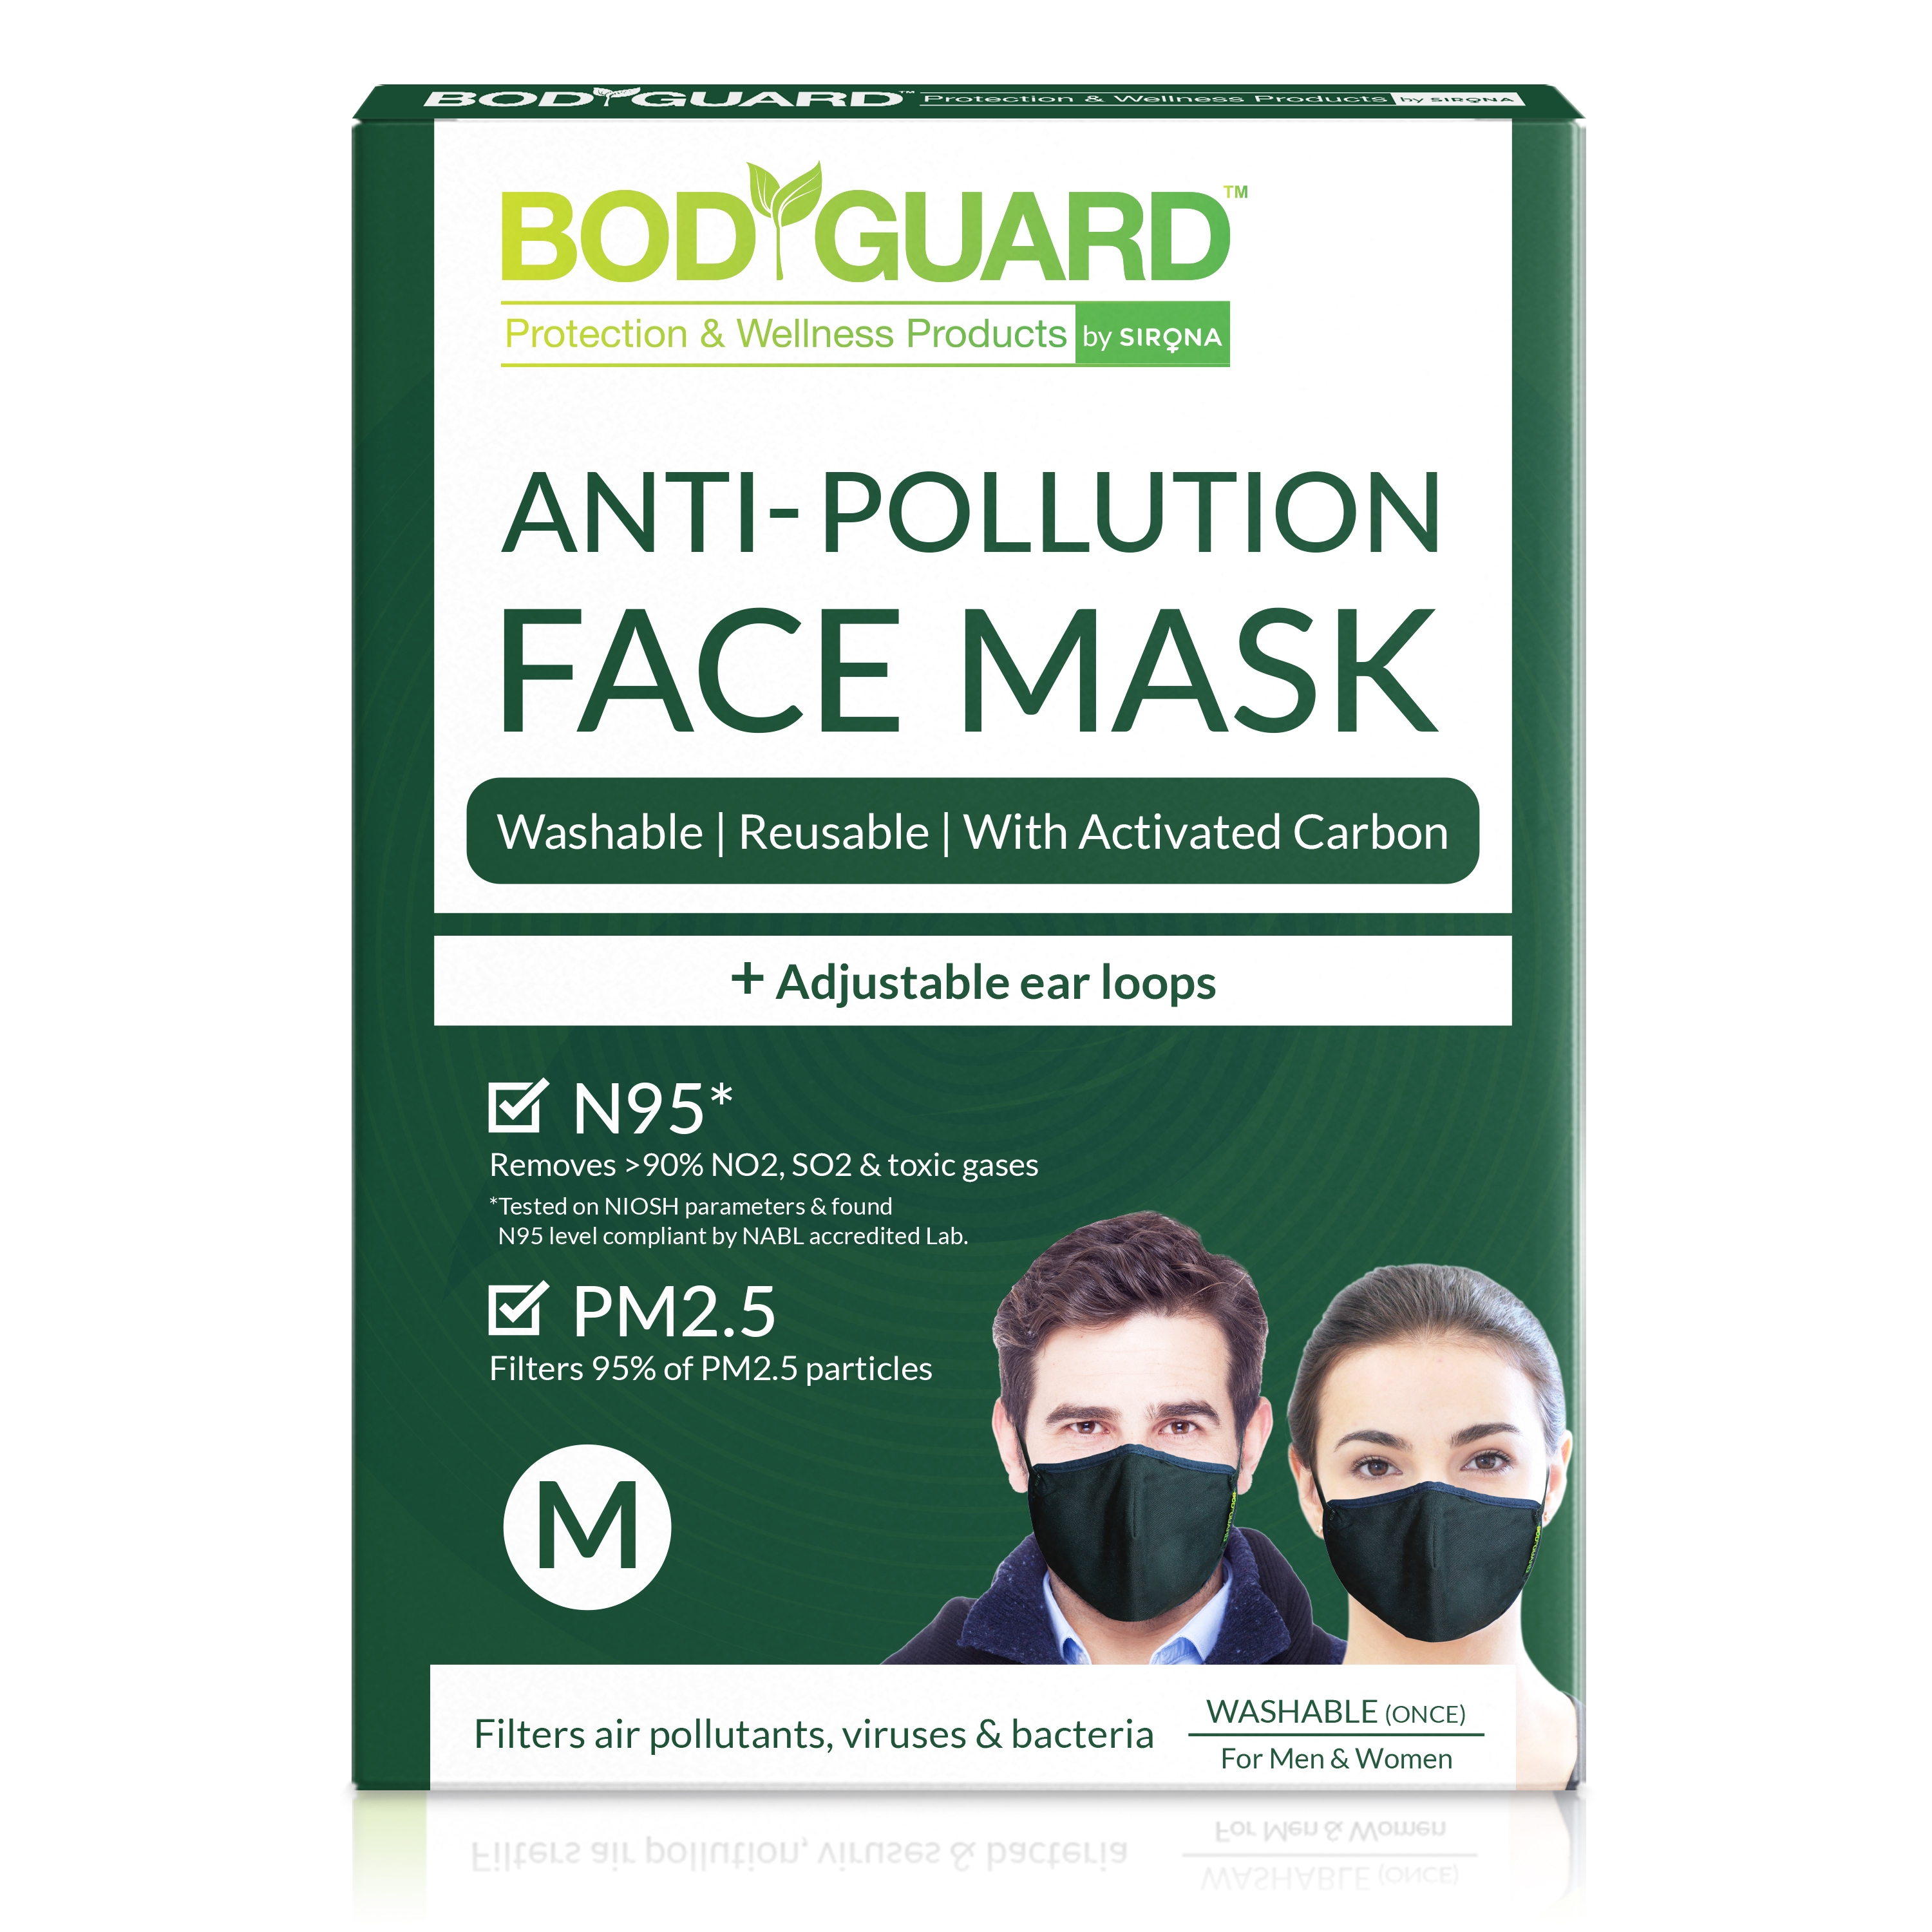 Bodyguard | Bodyguard N95 + PM2.5 Anti Pollution Face Mask with Activated Carbon - Medium